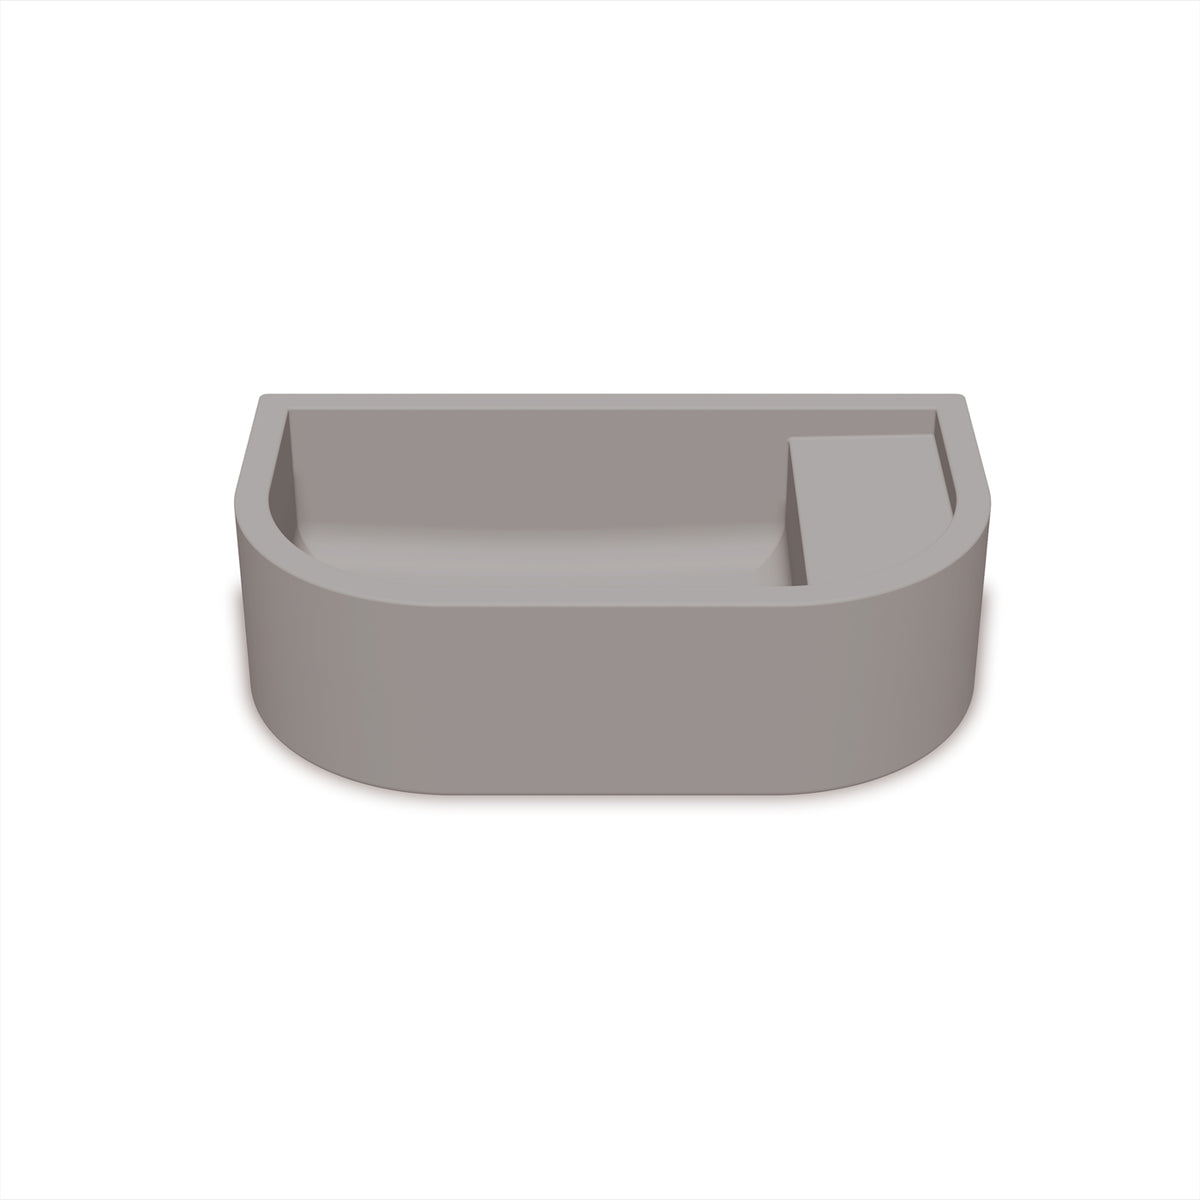 Loop 01 Basin - Overflow - Surface Mount (Sky Grey,No Tap Hole,Chrome)